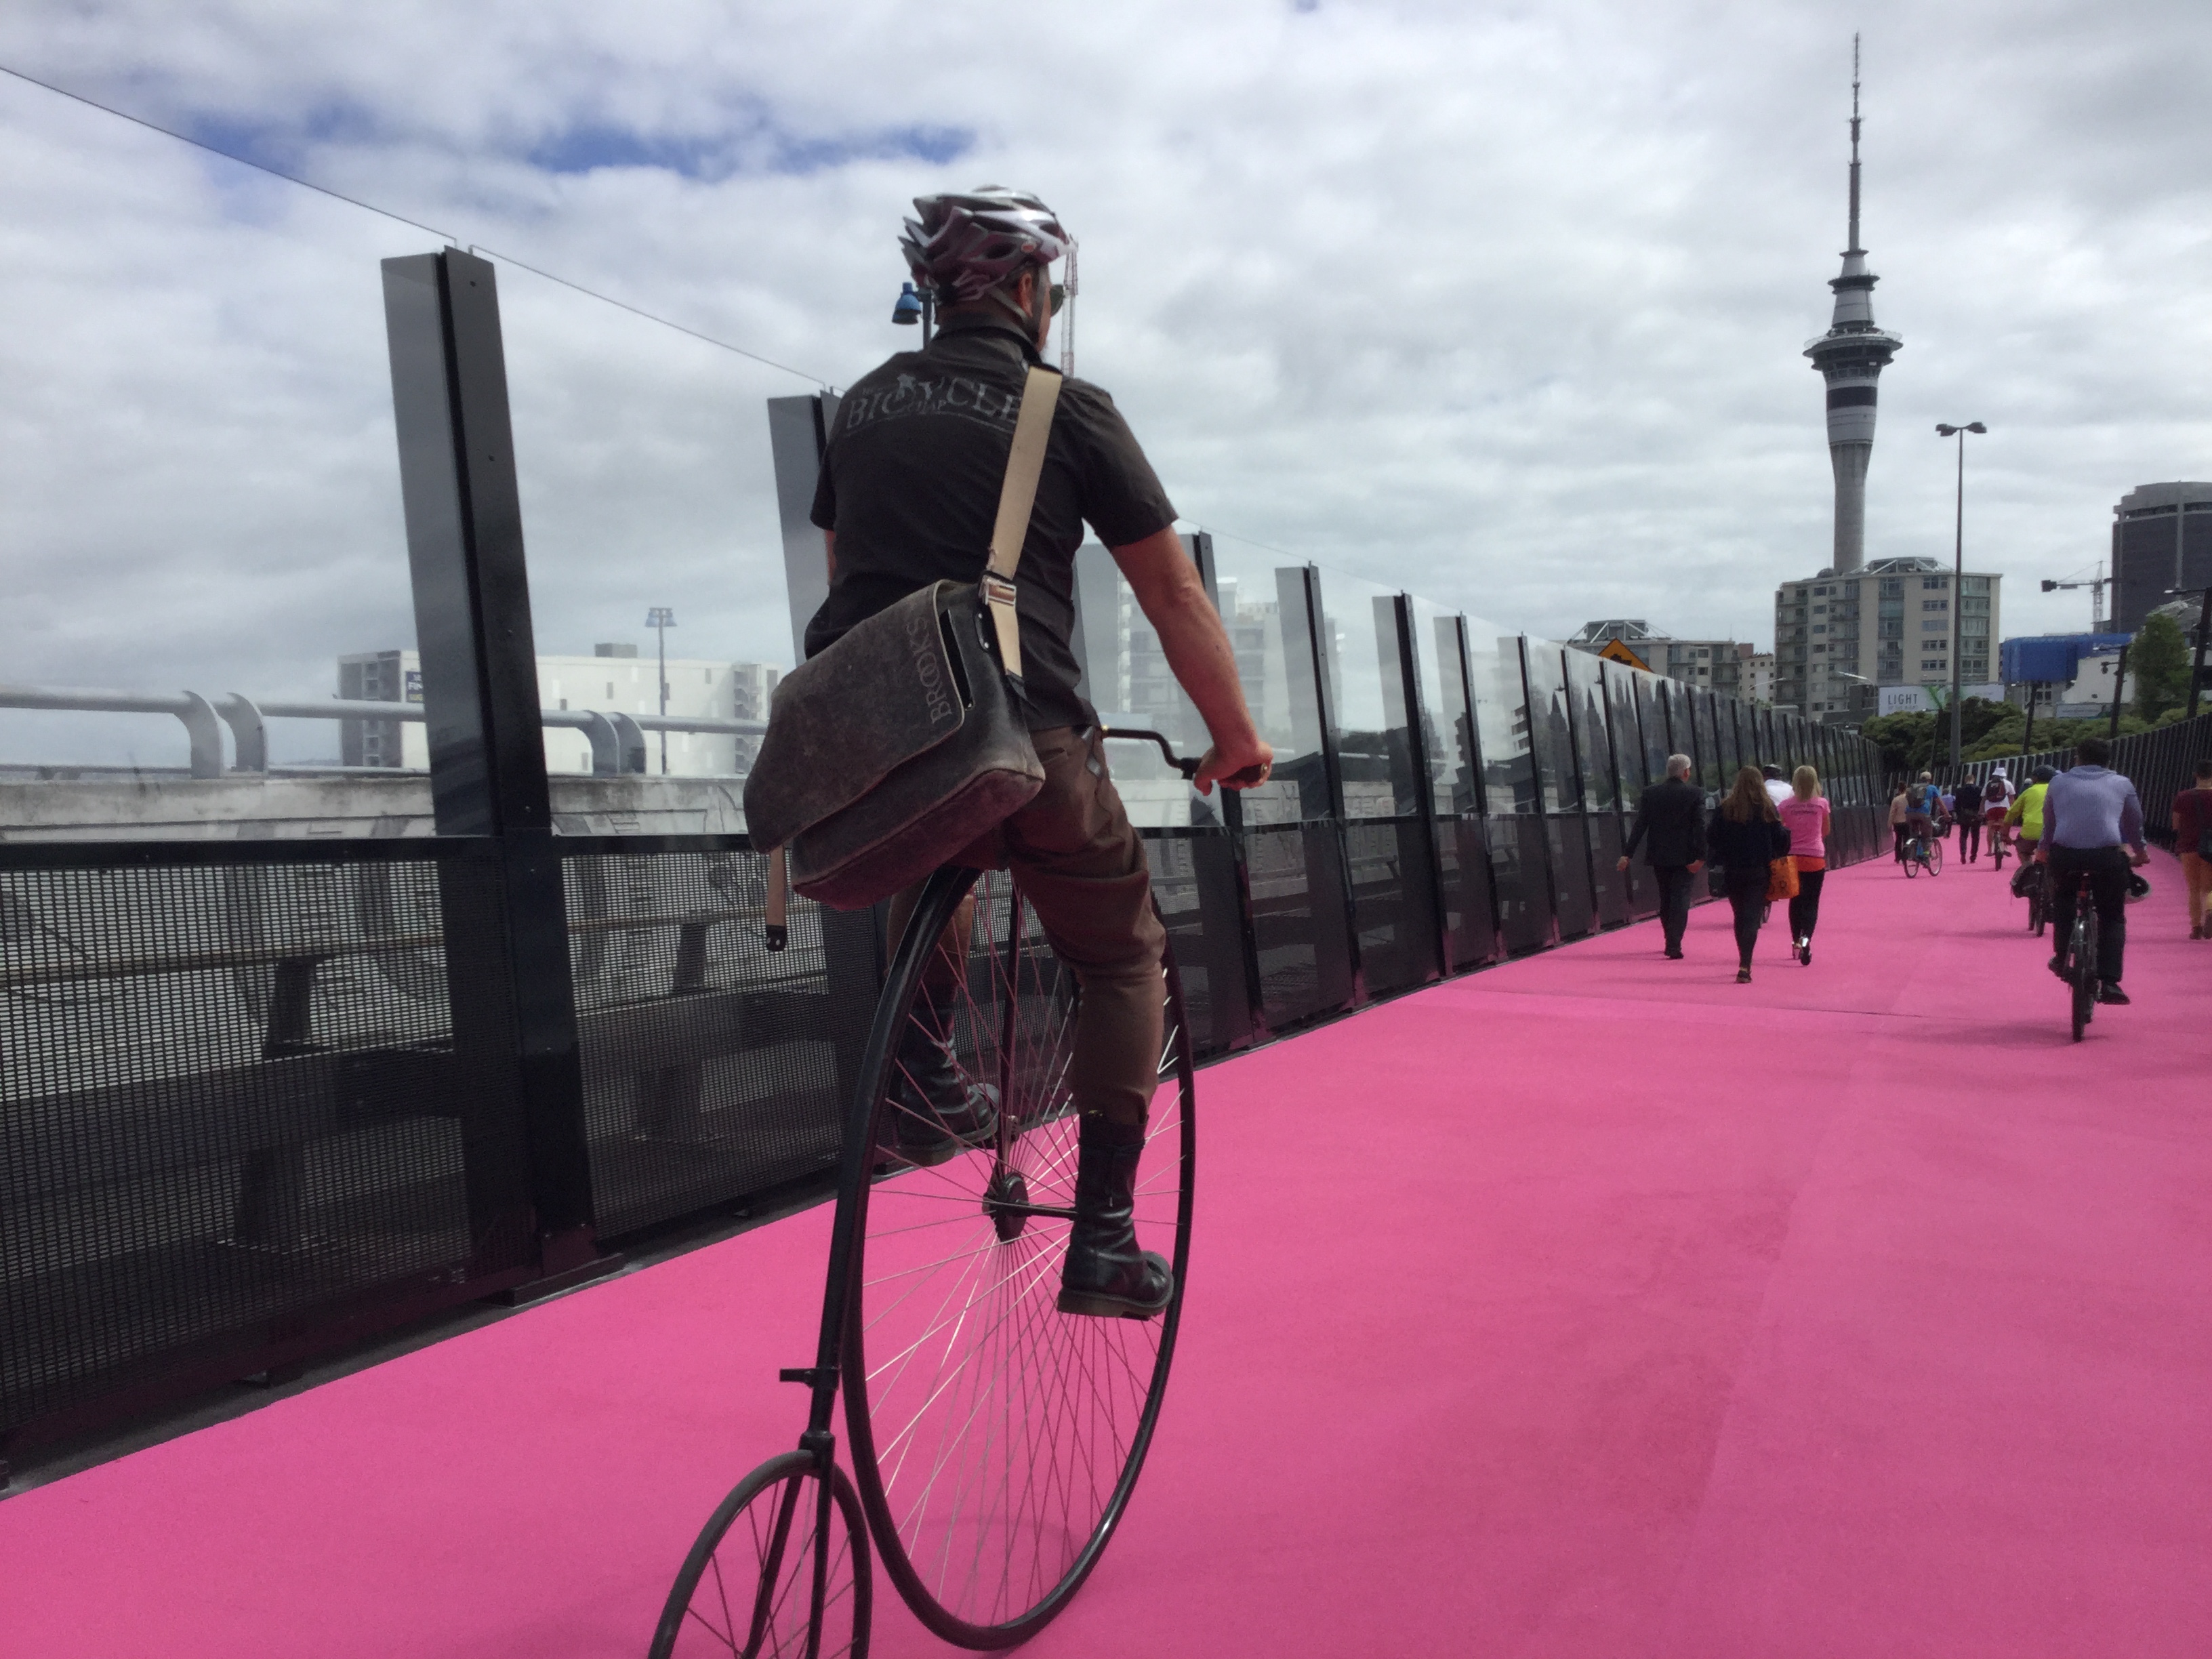 Attracting pedestrians and cyclists by colorful pathway